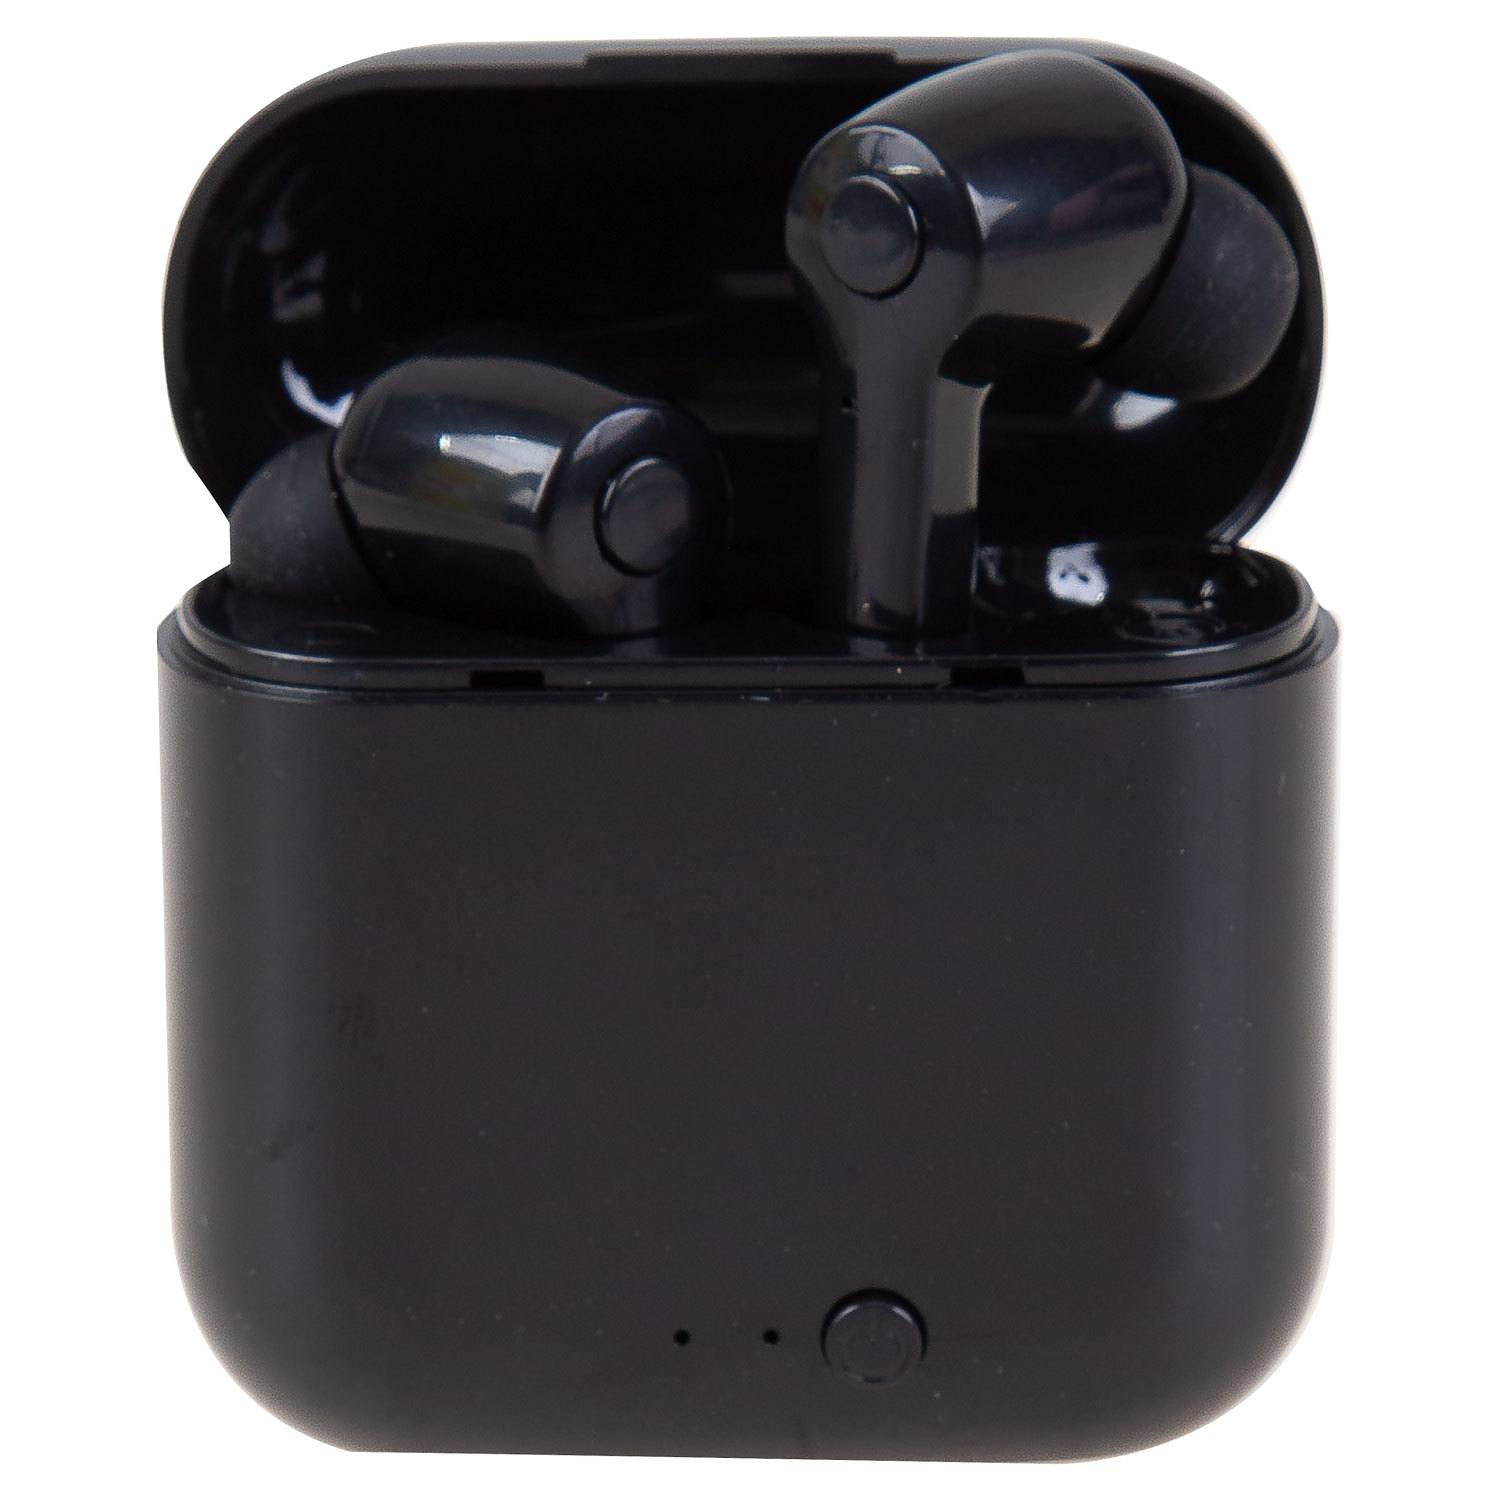 Bytech - True wireless earbuds with charging case, black